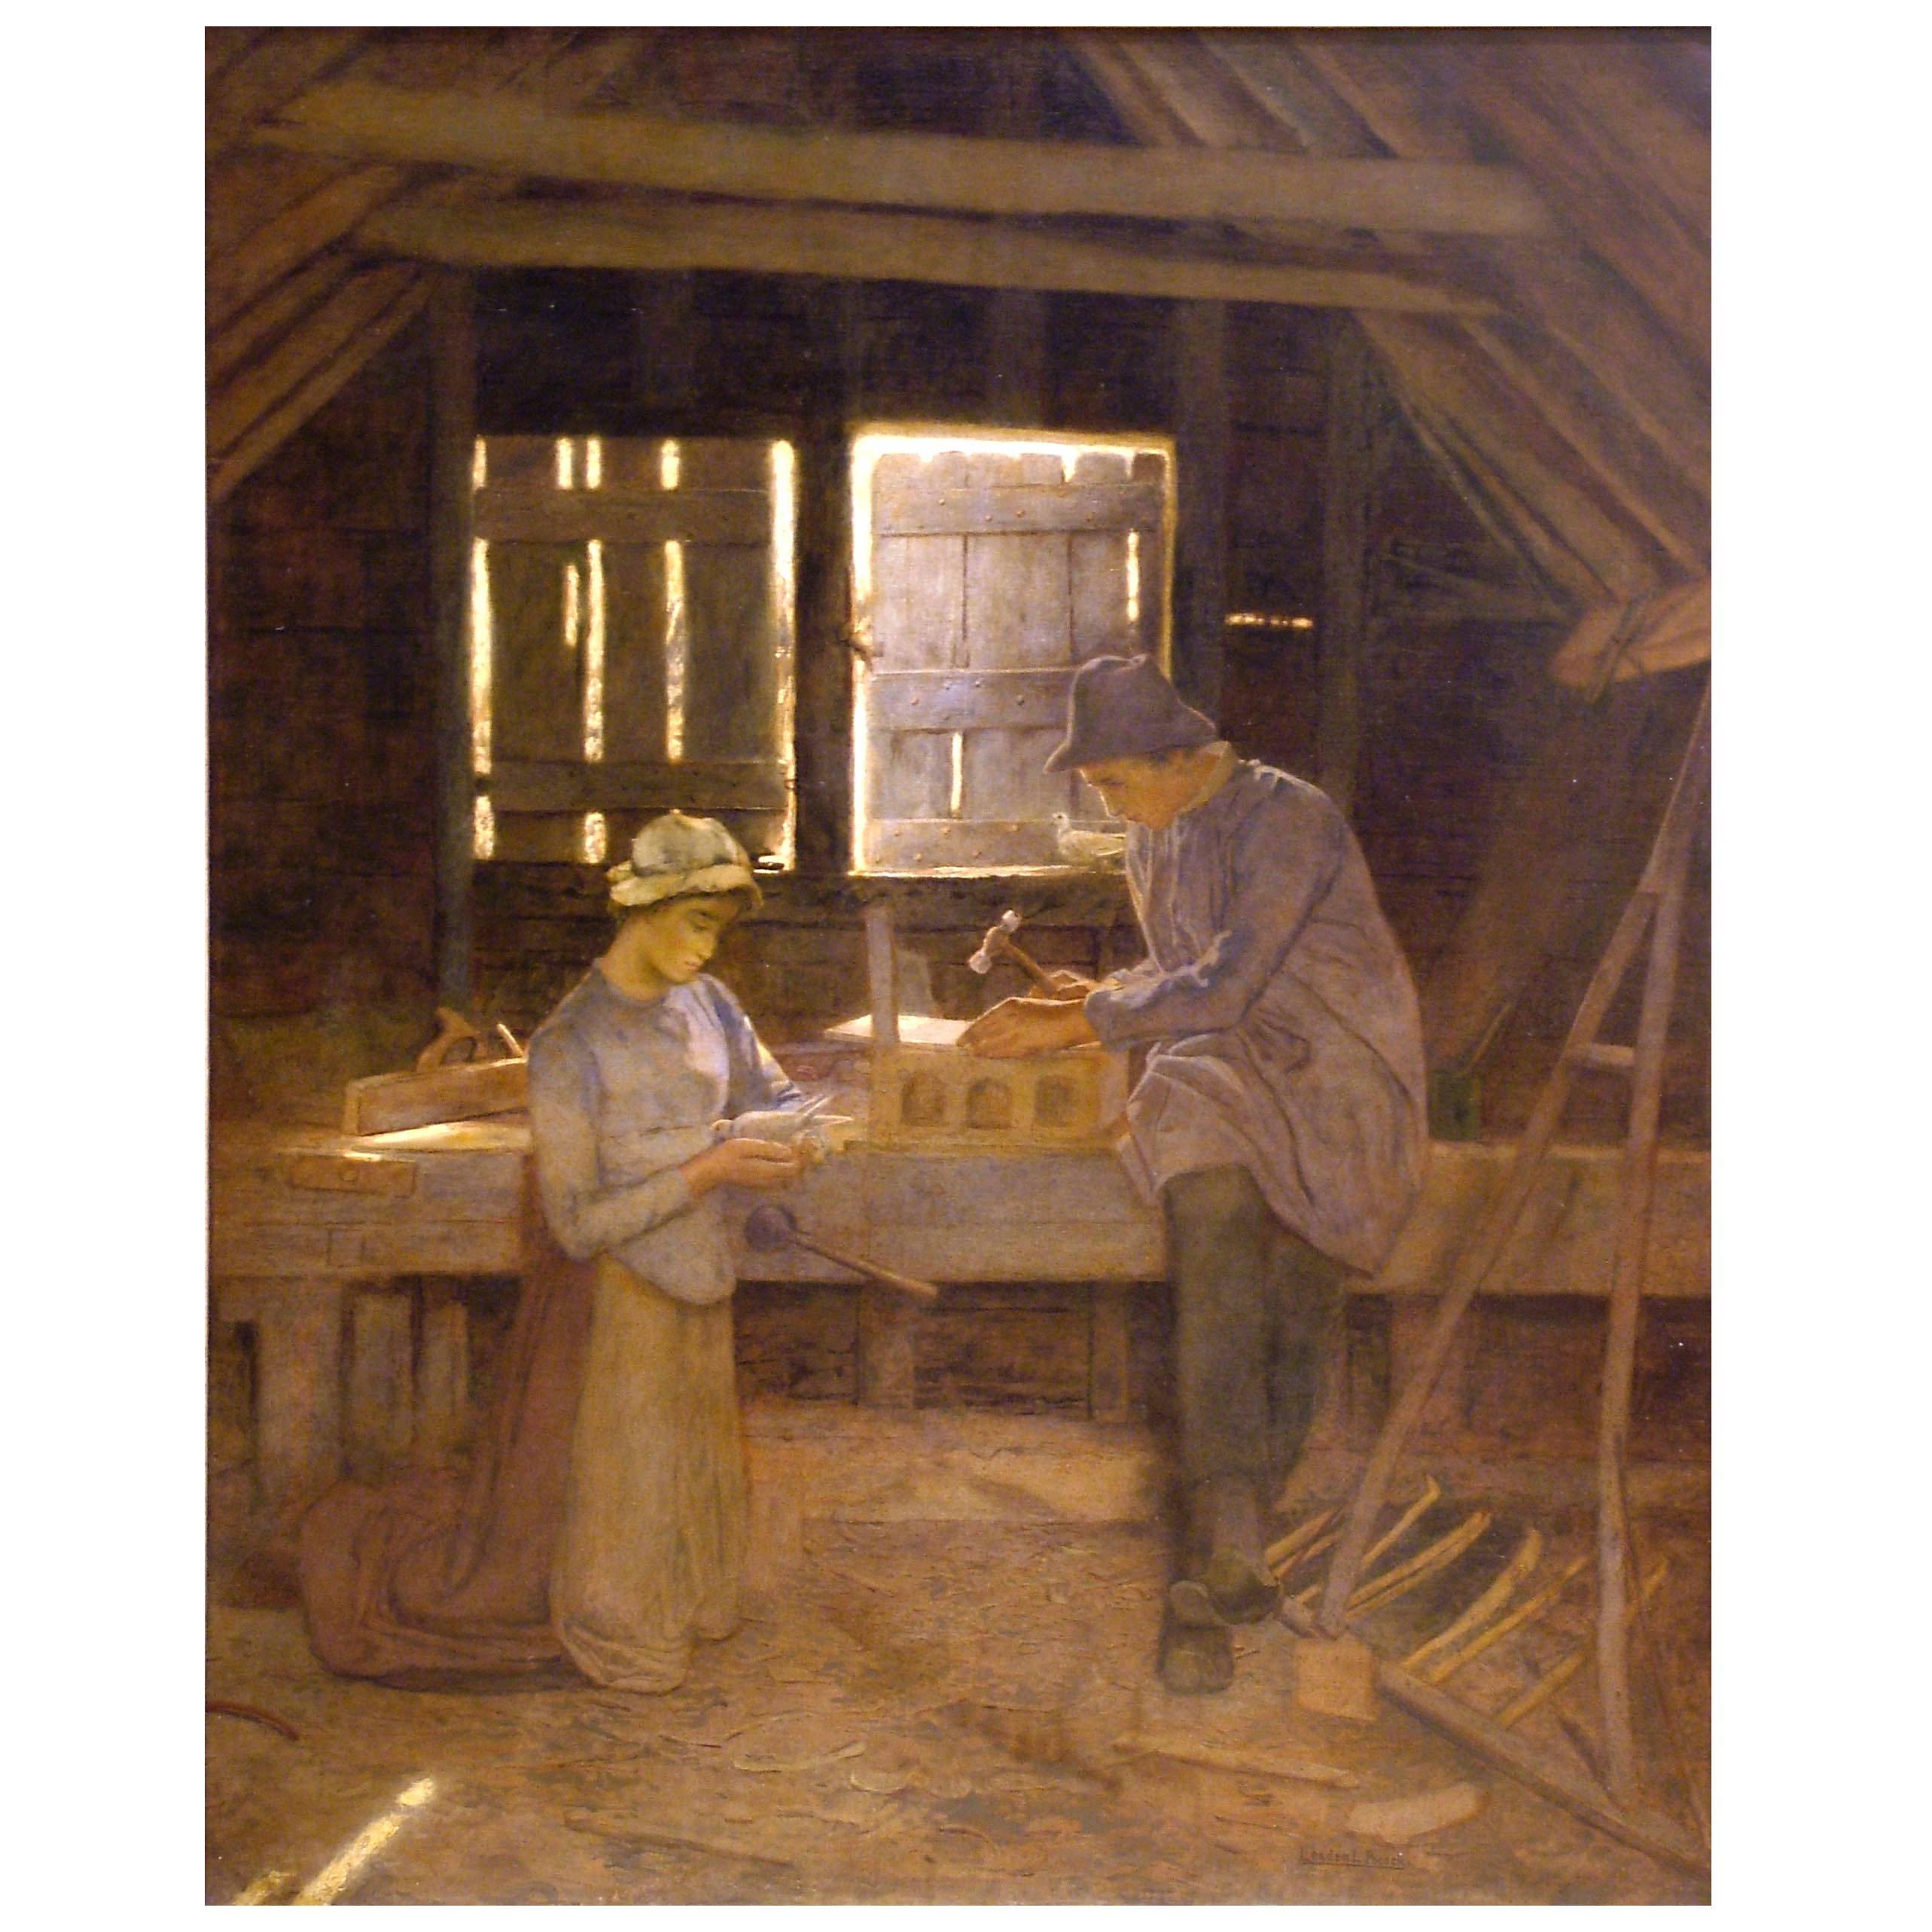 ‘Bucolic Joinings’ Painting by Lexden Lewis Pocock